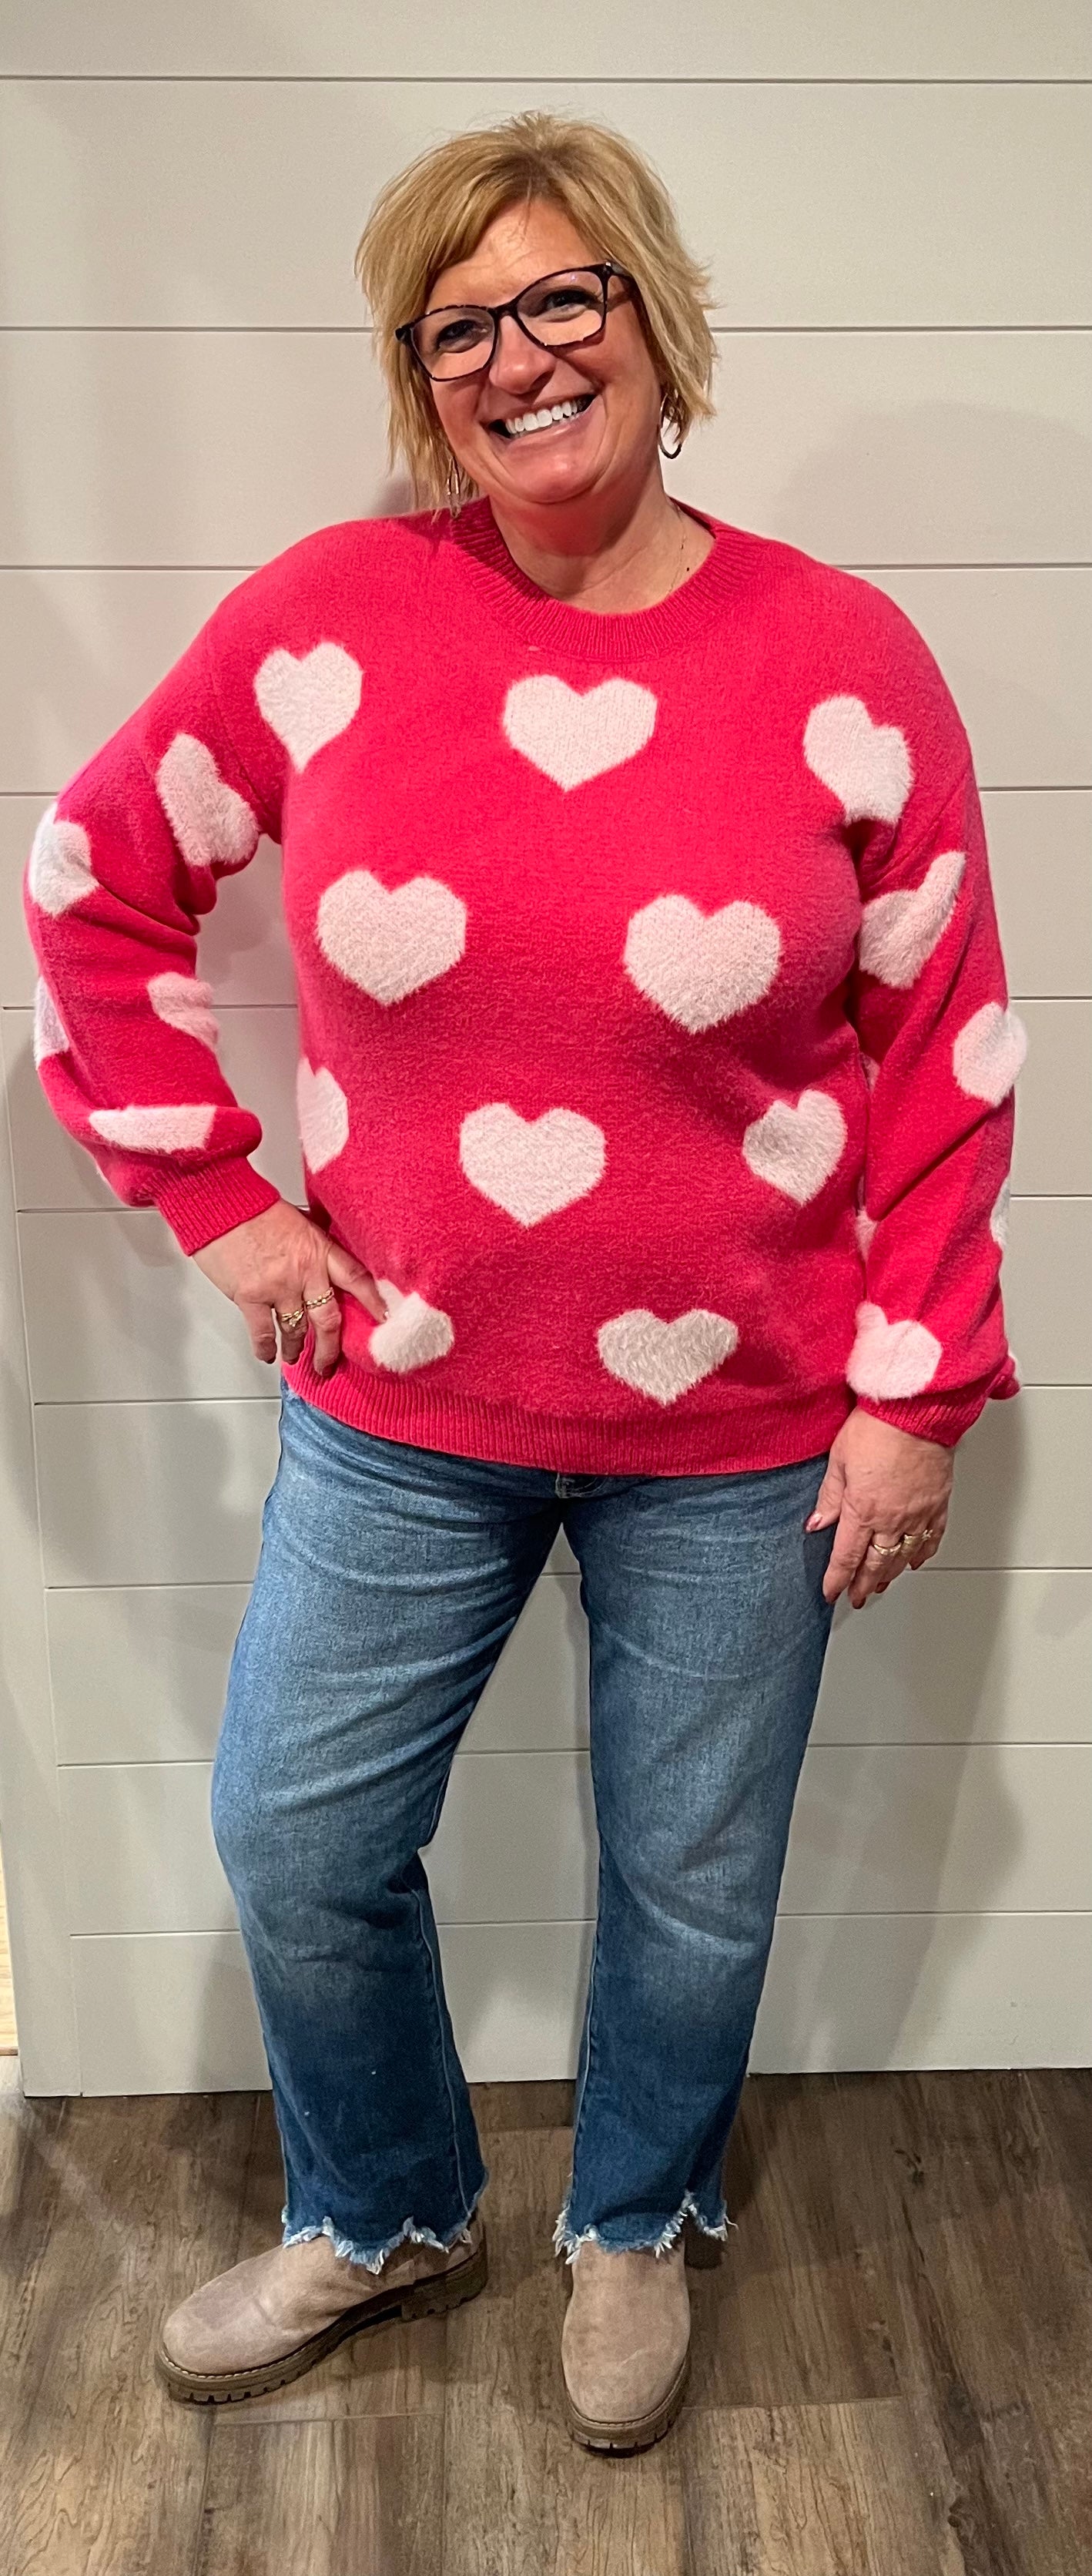 Hot Pink Hearts Sweater.